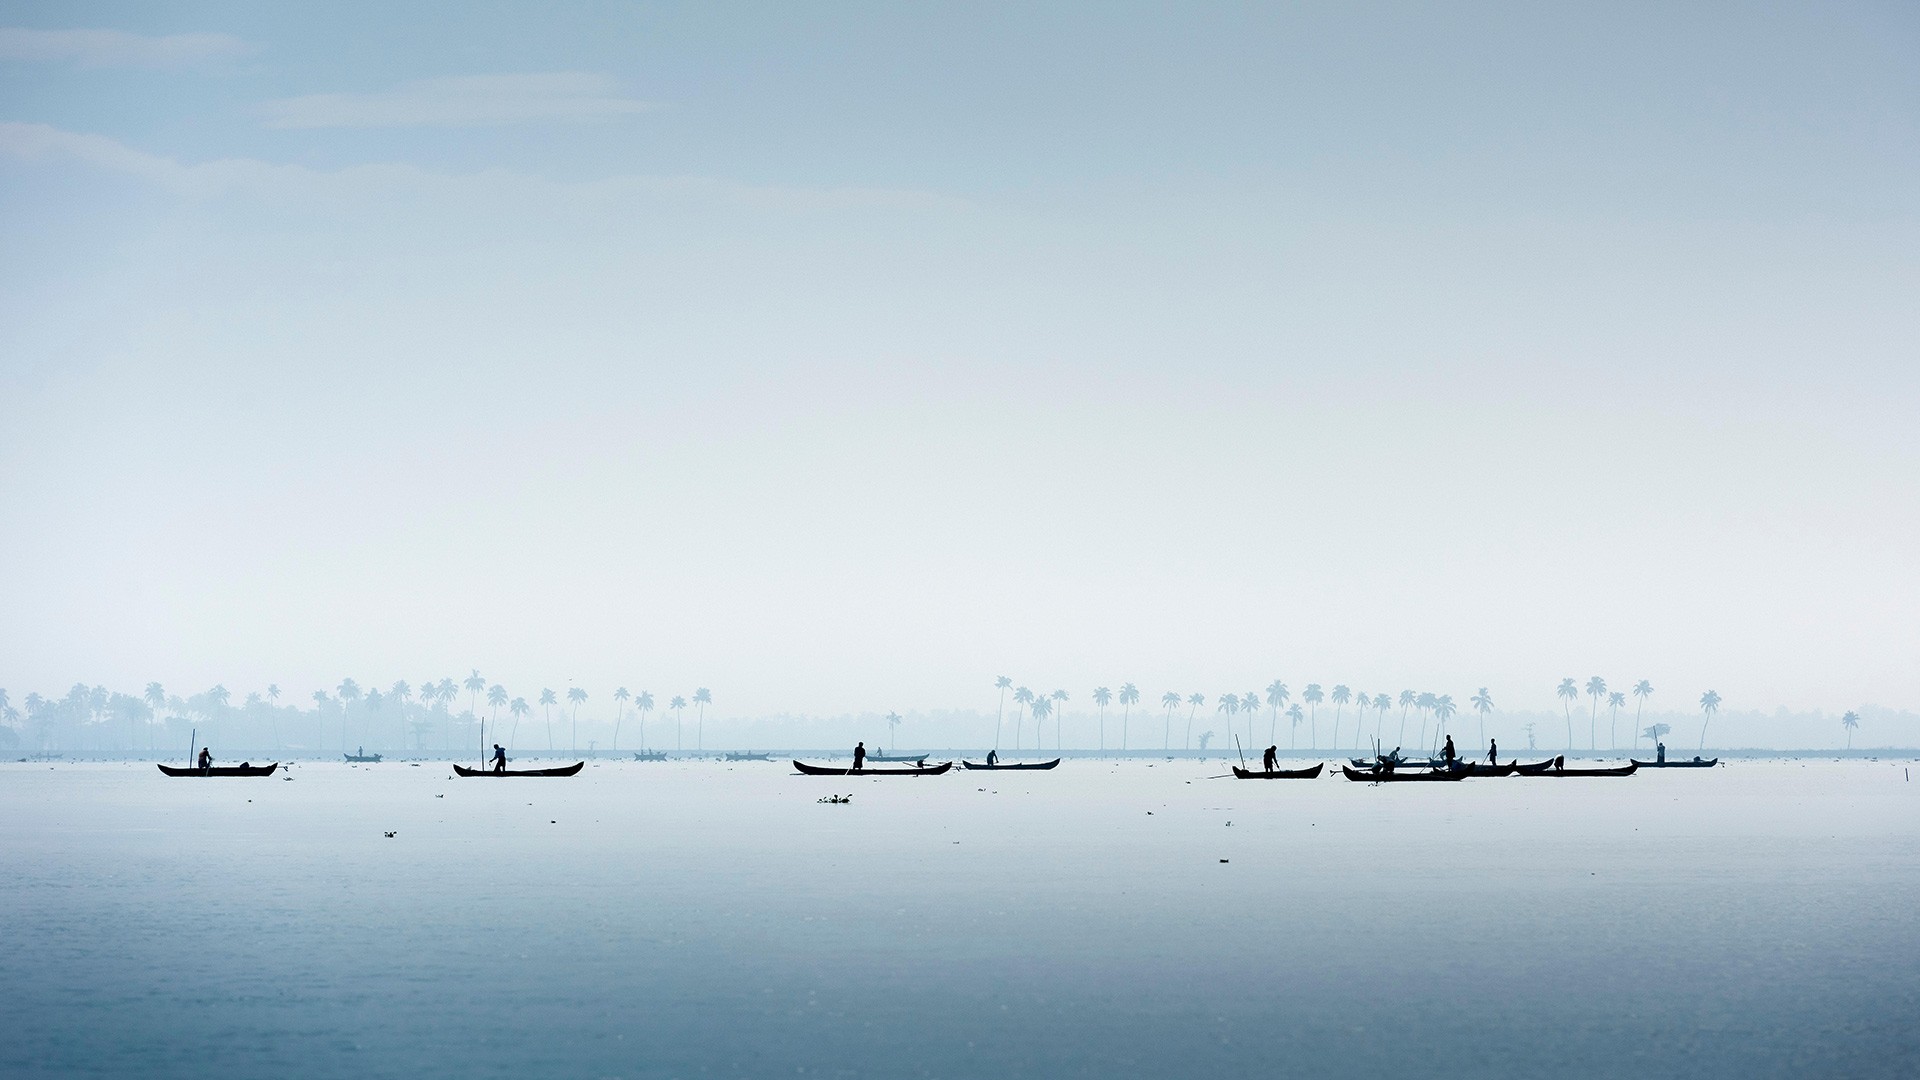 Nature Landscape India Water Lake Boat Men Fisherman Fishing Palm Trees Simple Sky Clouds Silhouette 1920x1080